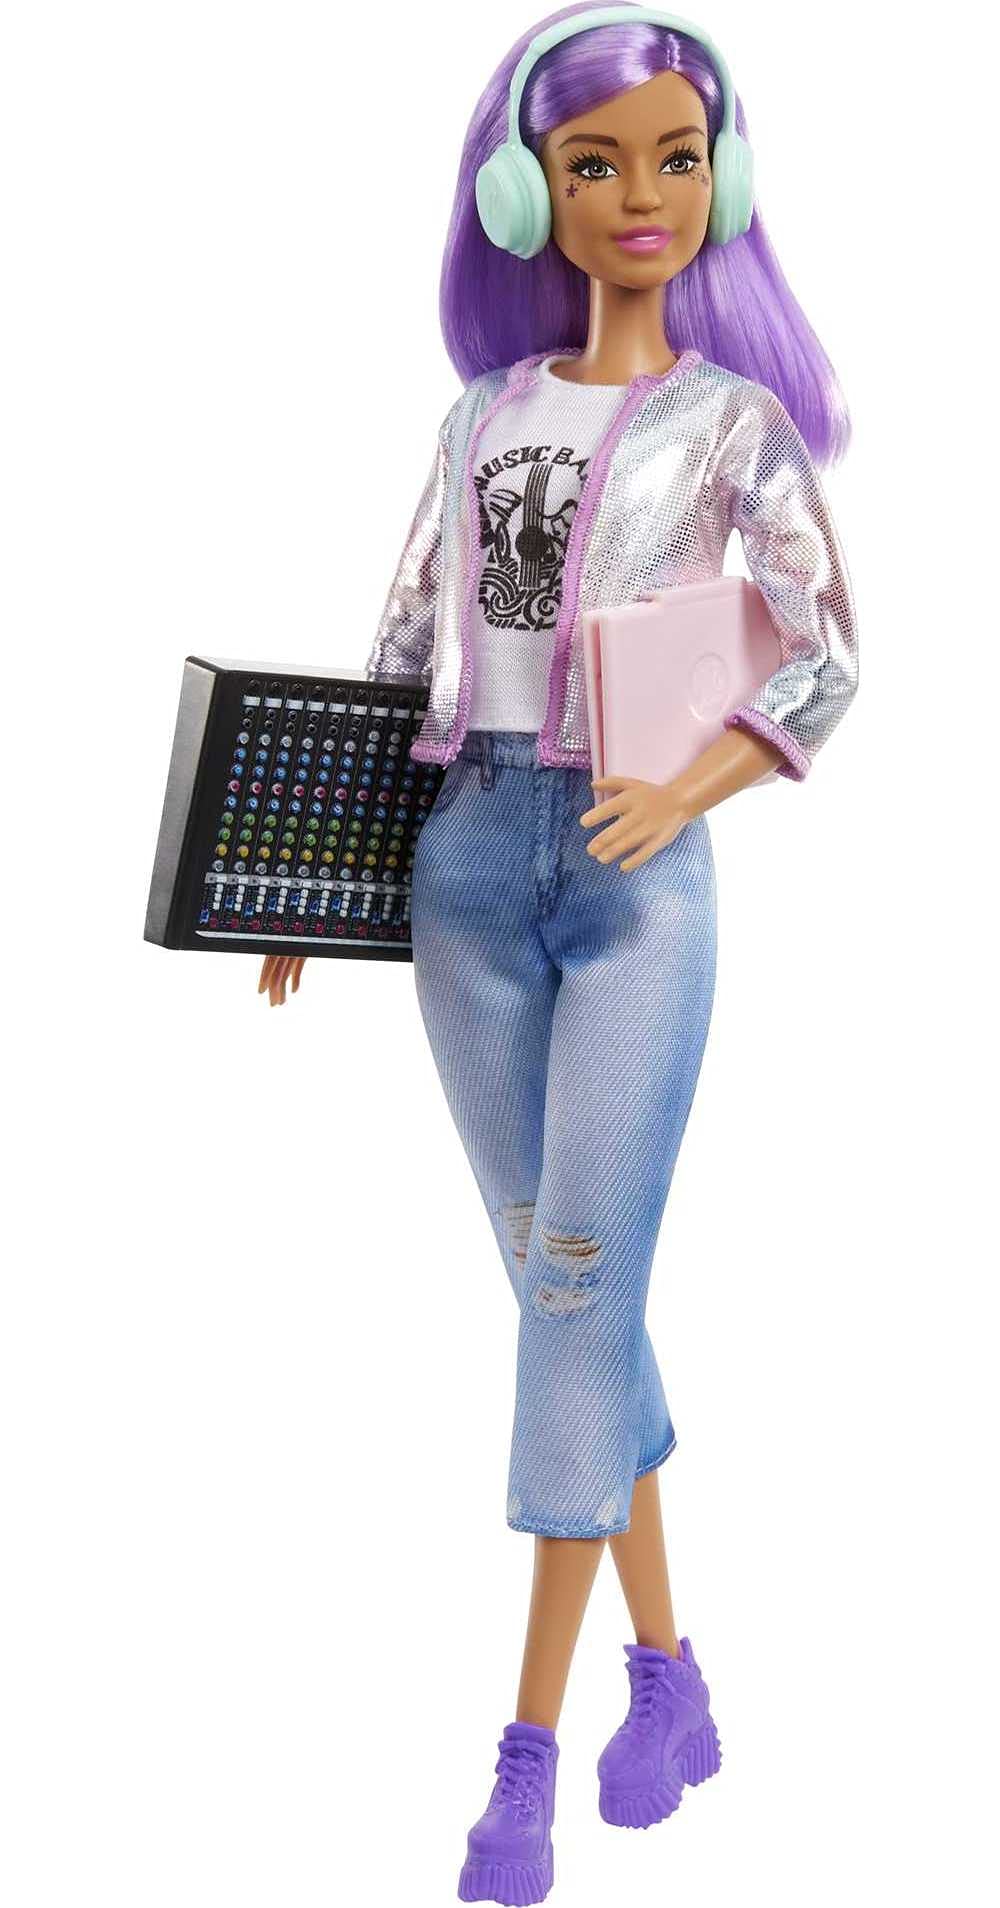 Barbie Career of The Year Music Producer Doll (12-in), Colorful Purple Hair, Trendy Tee, Jacket & Jeans Plus Sound Mixing Board, Computer & Headphone Accessories, Great Toy Gift